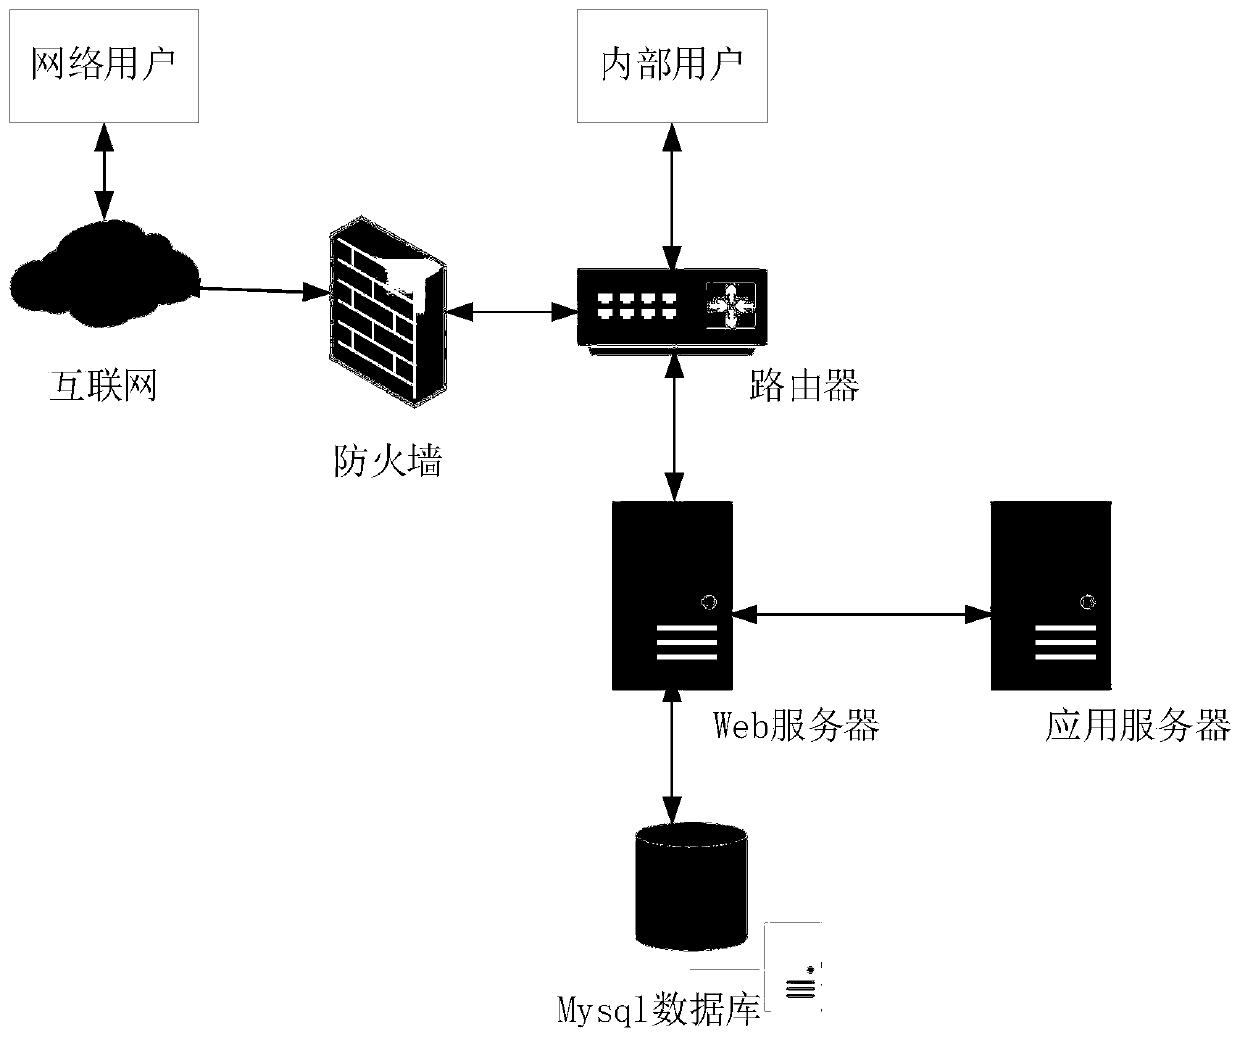 Network attack and defense virtual simulation and security evaluation method and system based on virtualization technology